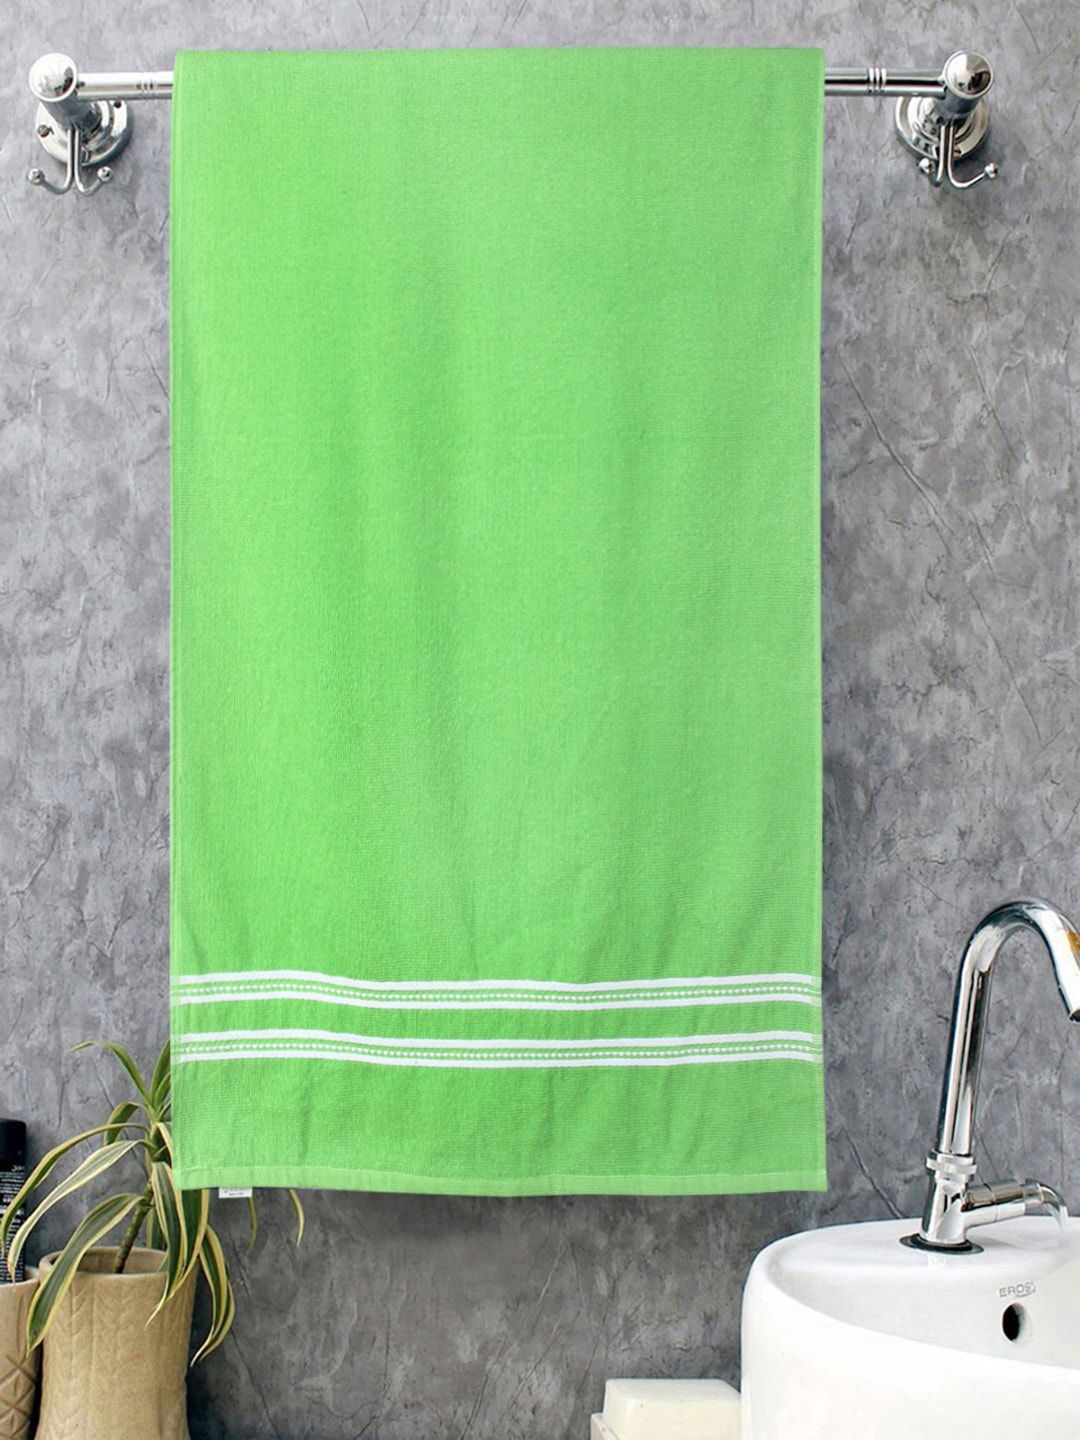 ROMEE Green Solid 500 GSM Pure Cotton Bath Towel Price in India